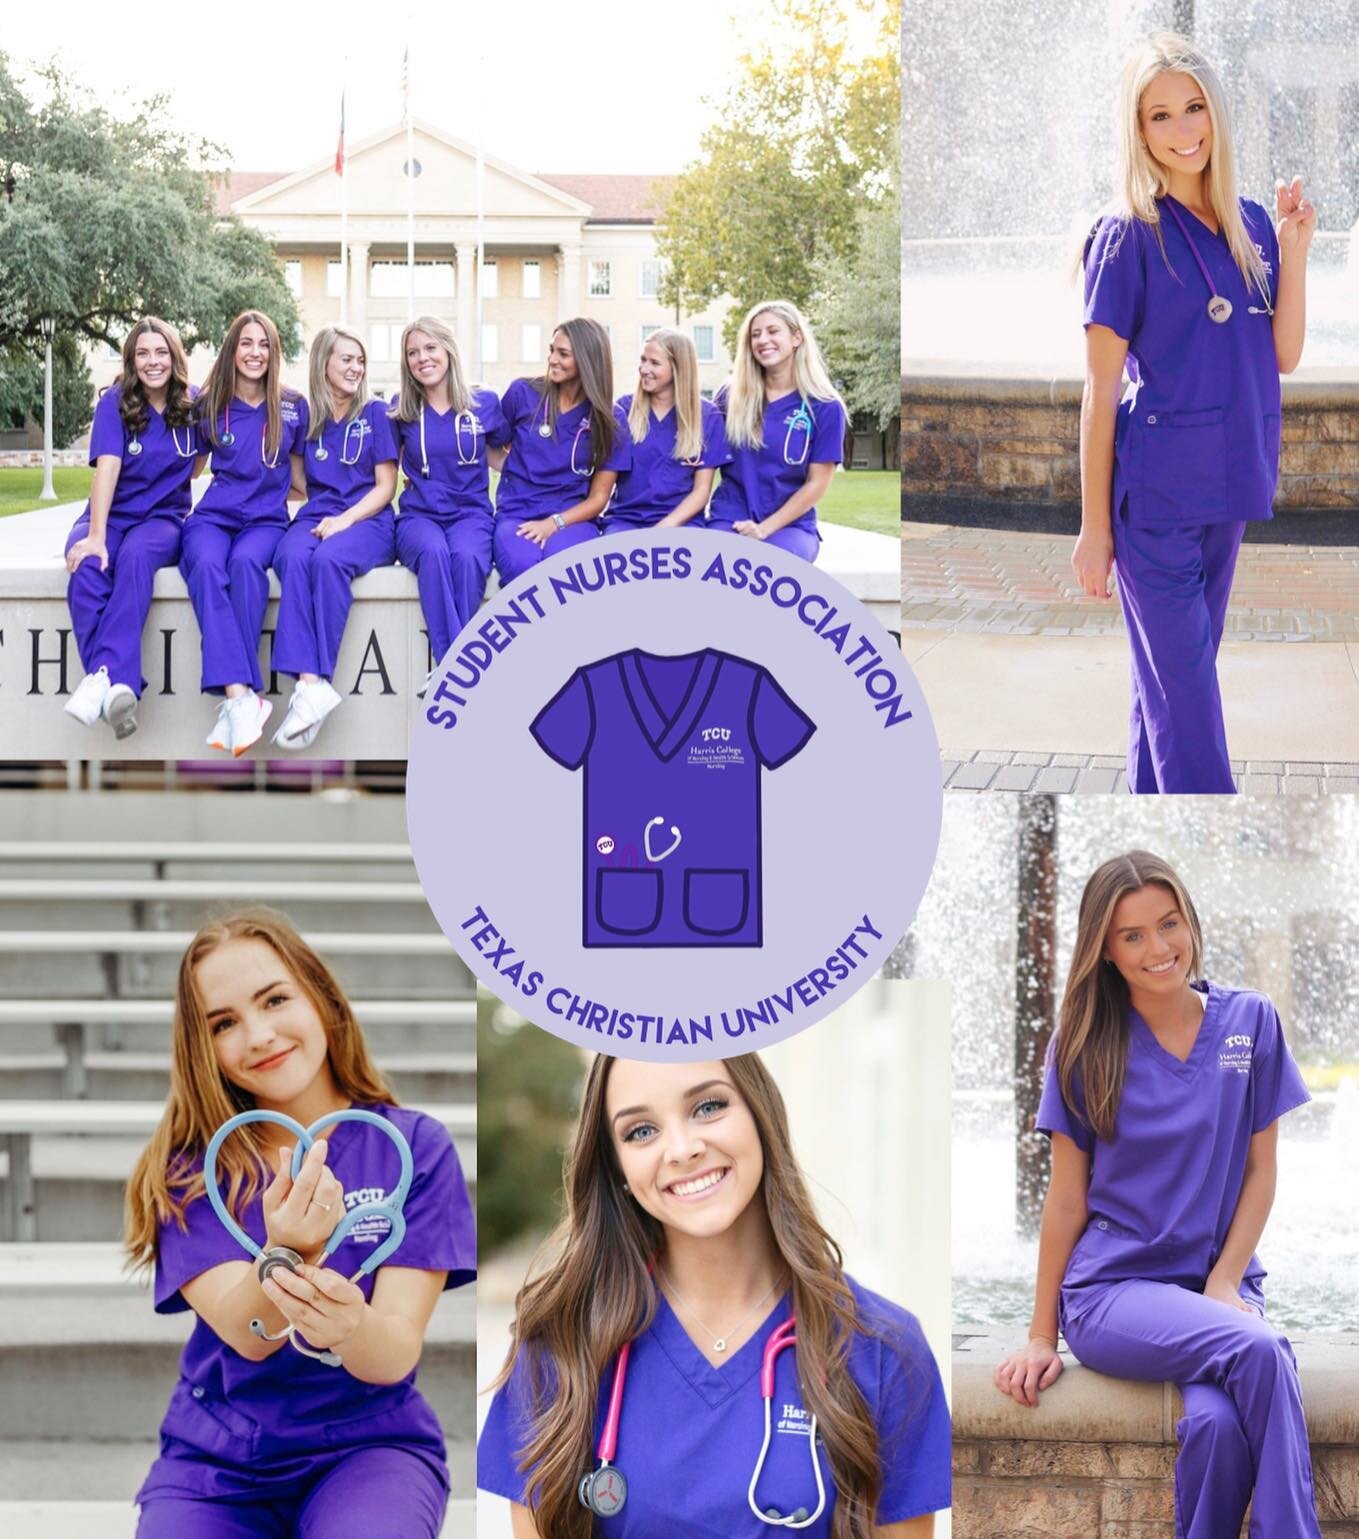 We can&rsquo;t wait to see y&rsquo;all at the Org Fair today from 4:30-5:30! Join our Zoom link (typed out below) if you have any questions about SNA or want to get some members of our Exec board! 🩺
https://tcu.zoom.us/j/95326190917